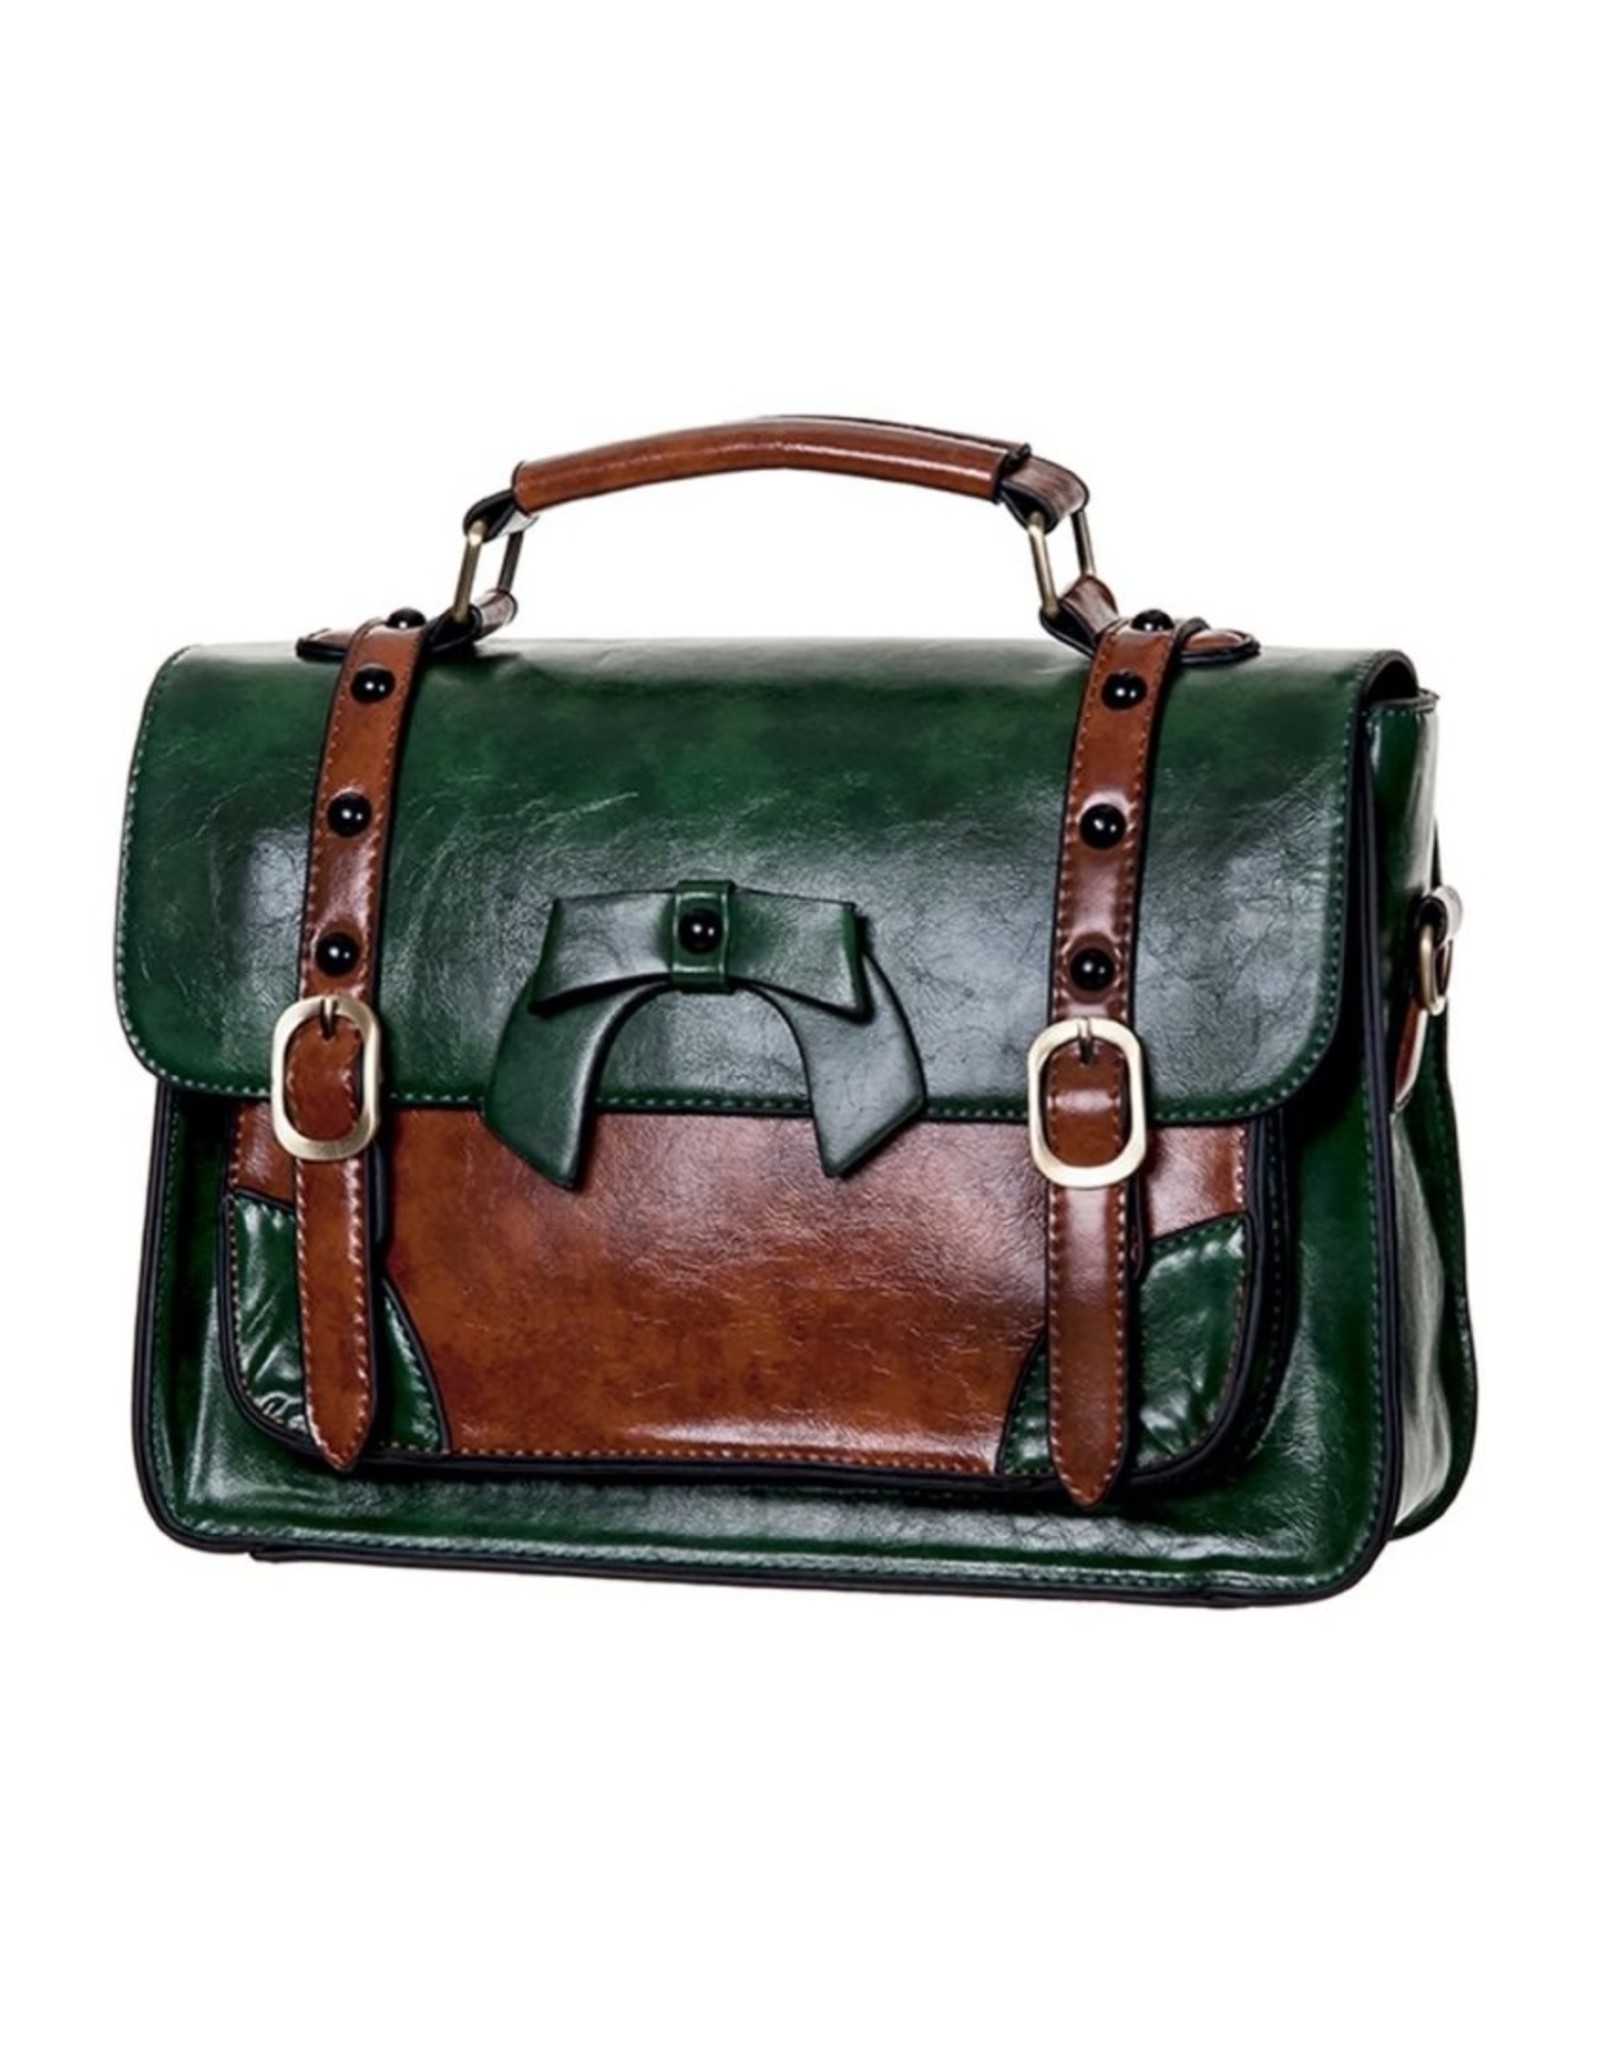 Vintage Retro bags  Vintage bags - Banned Retro hand bag with buckles and bow (green)